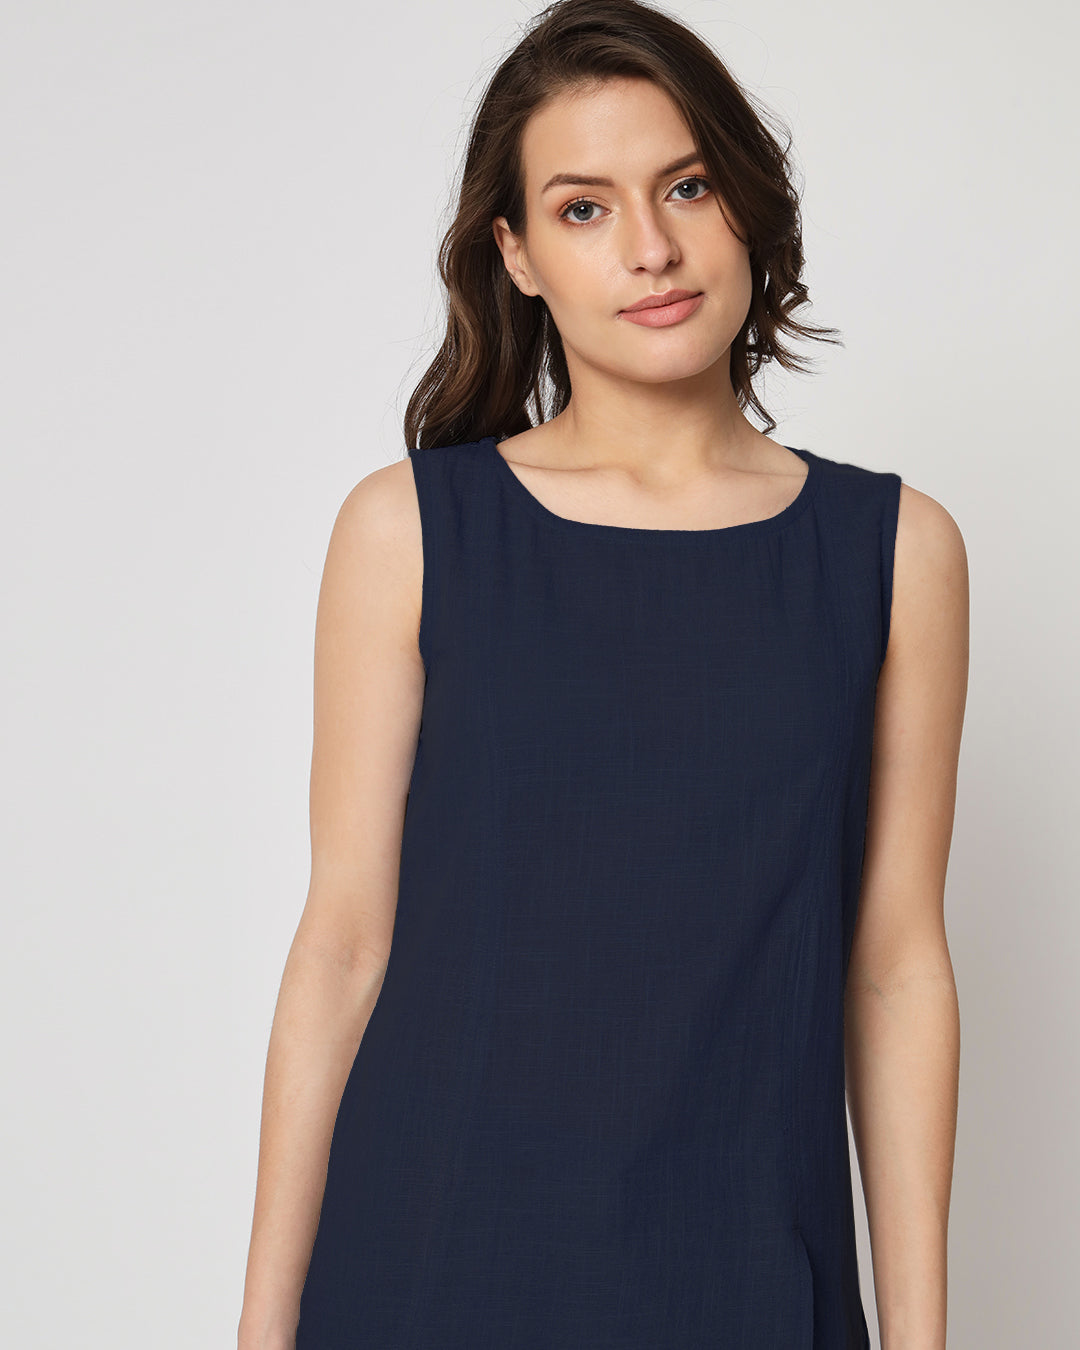 Midnight Blue Sleeveless Short Length Solid Top (Without Bottoms)